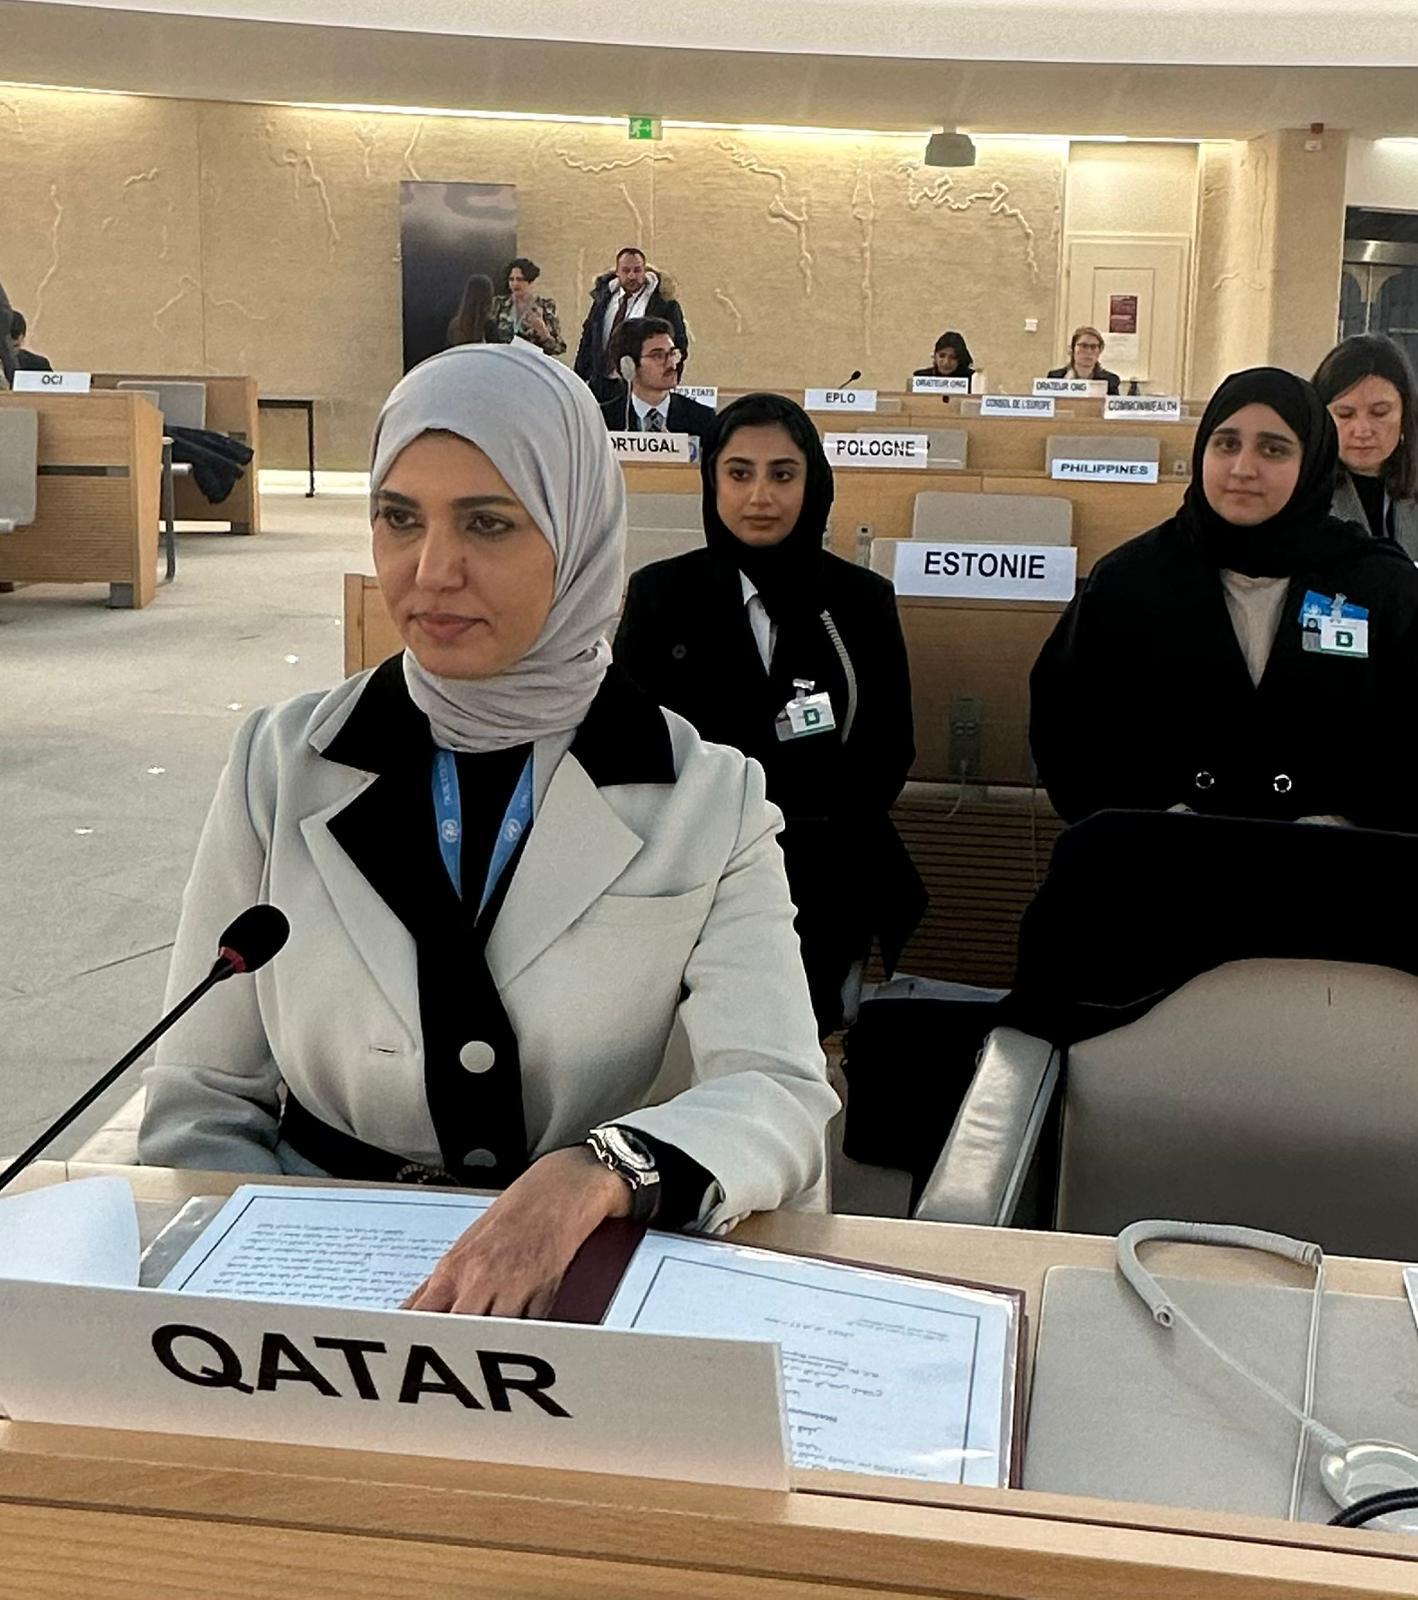 Qatar Affirms Great Attention to Youth Education, Training, Job Opportunities